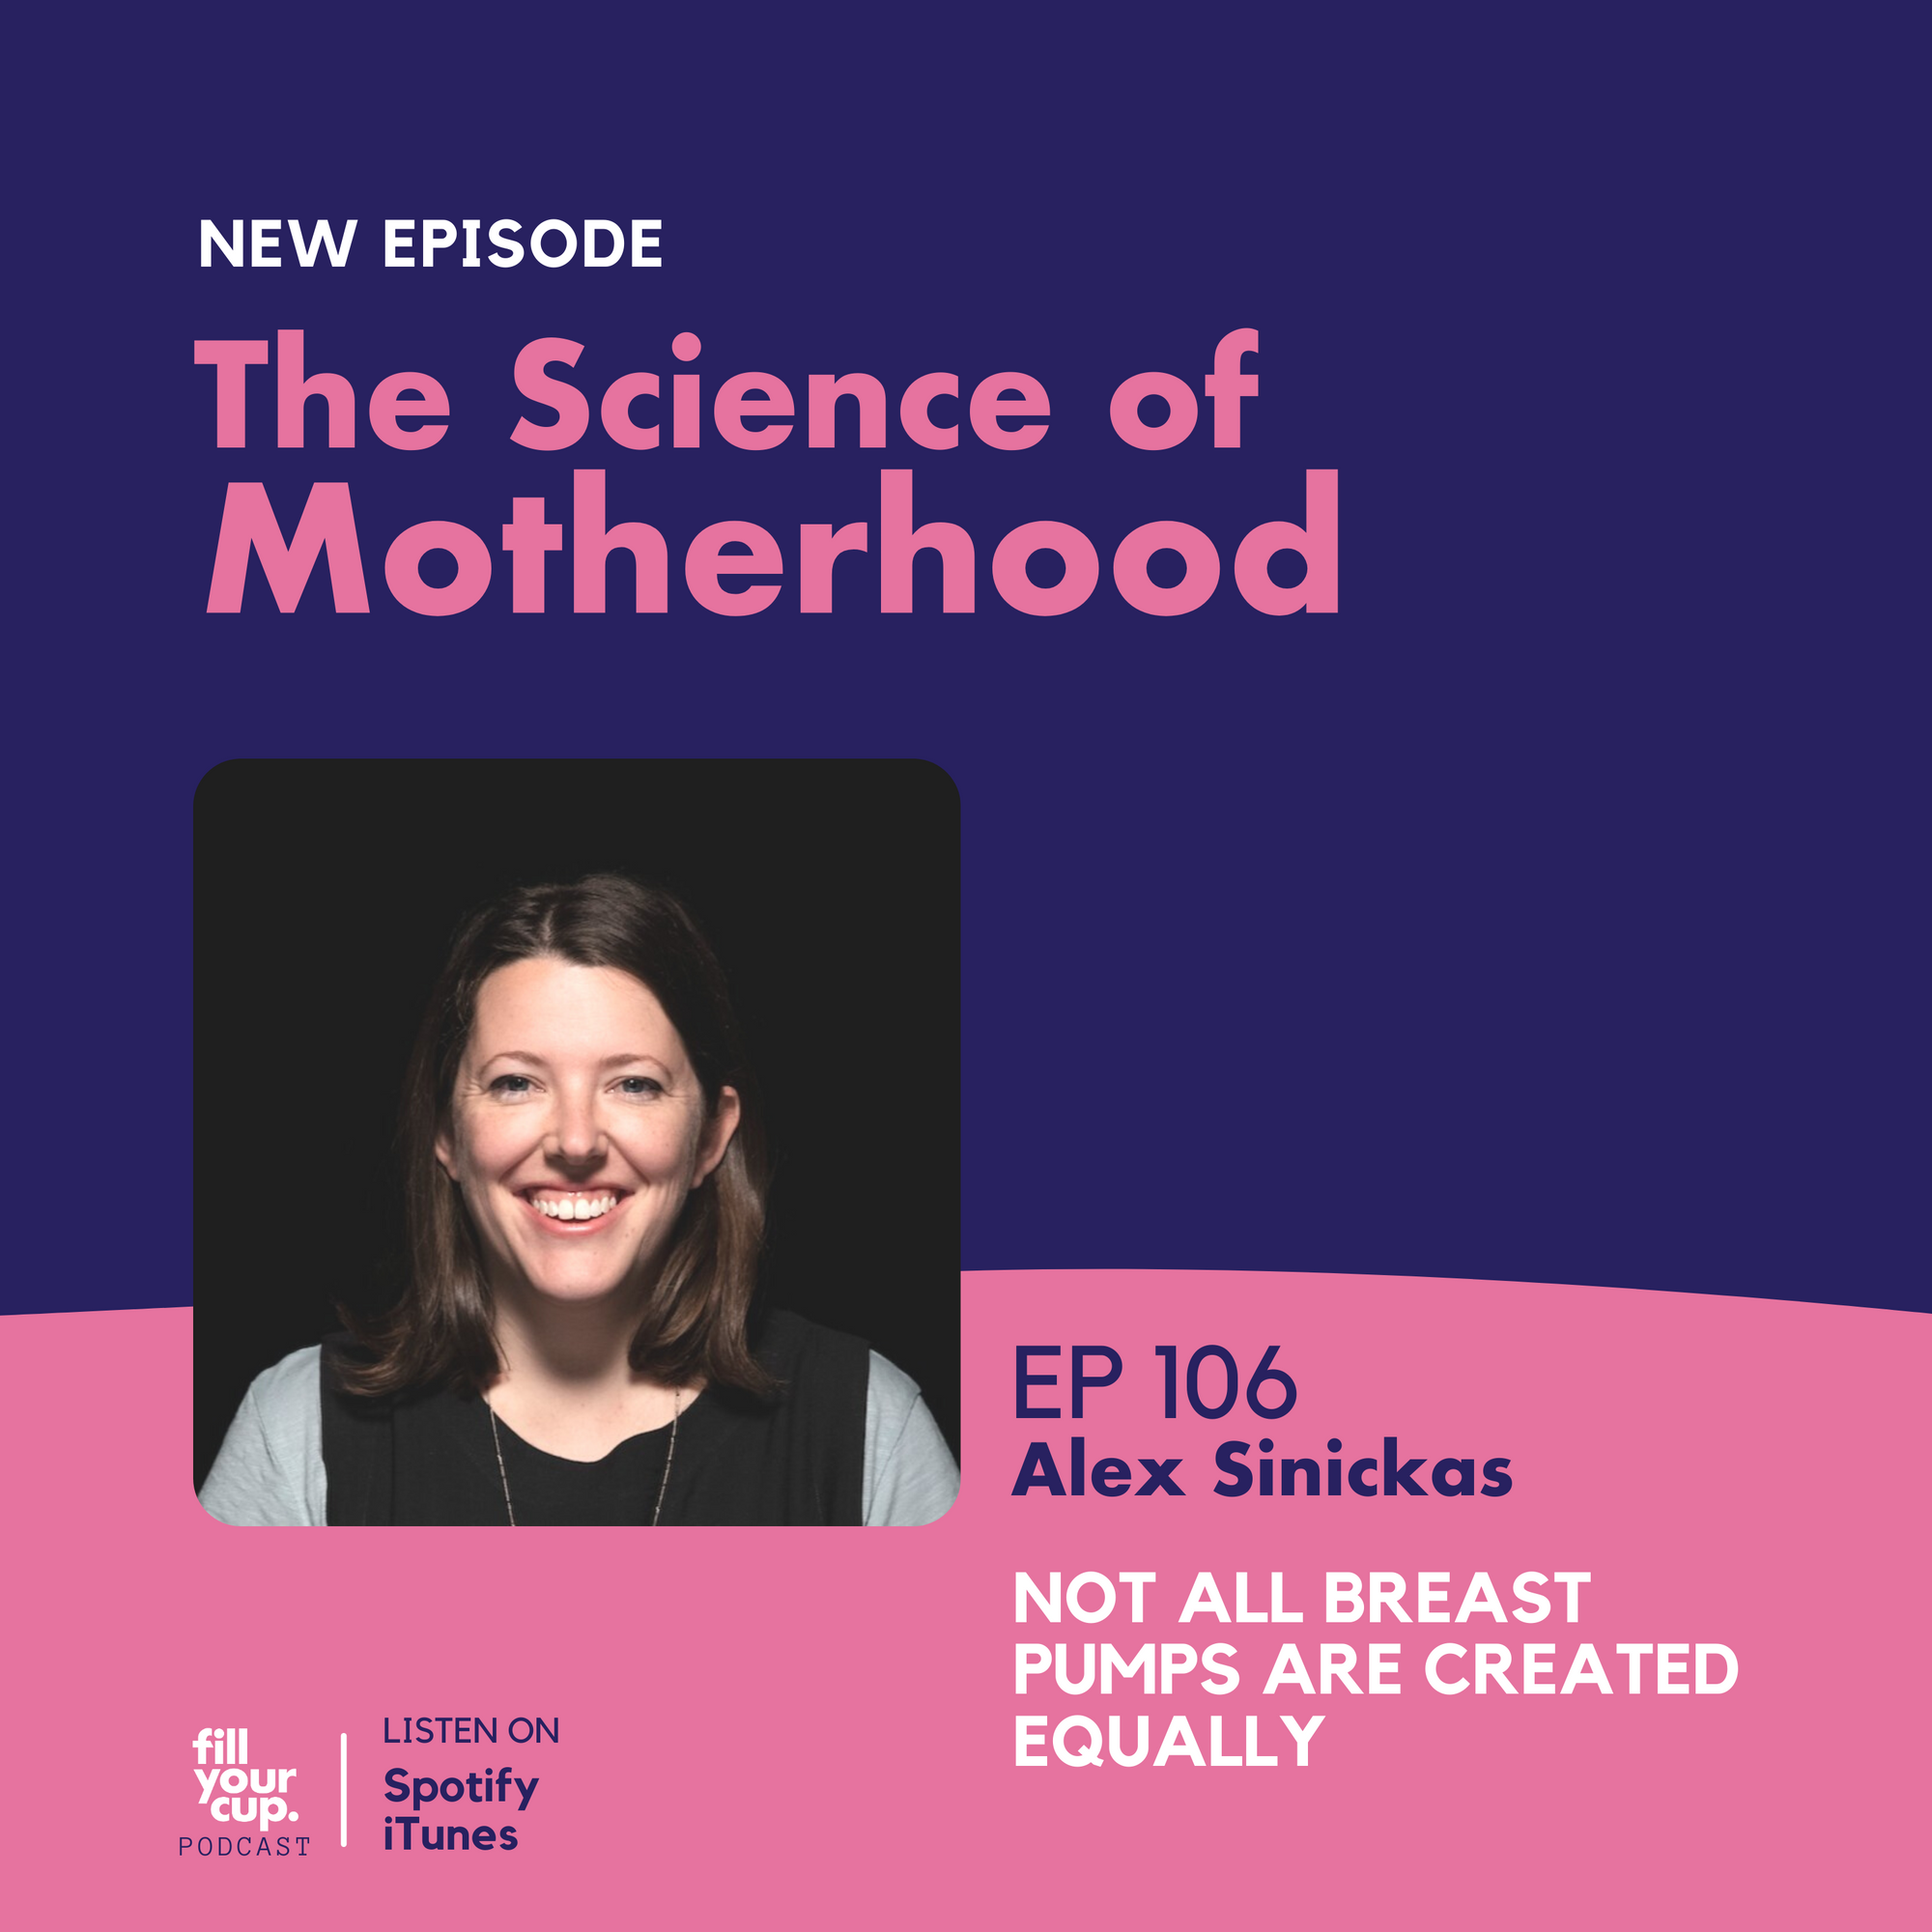 Ep 106. Alex Sinickas - Not all Breast Pumps are created equally